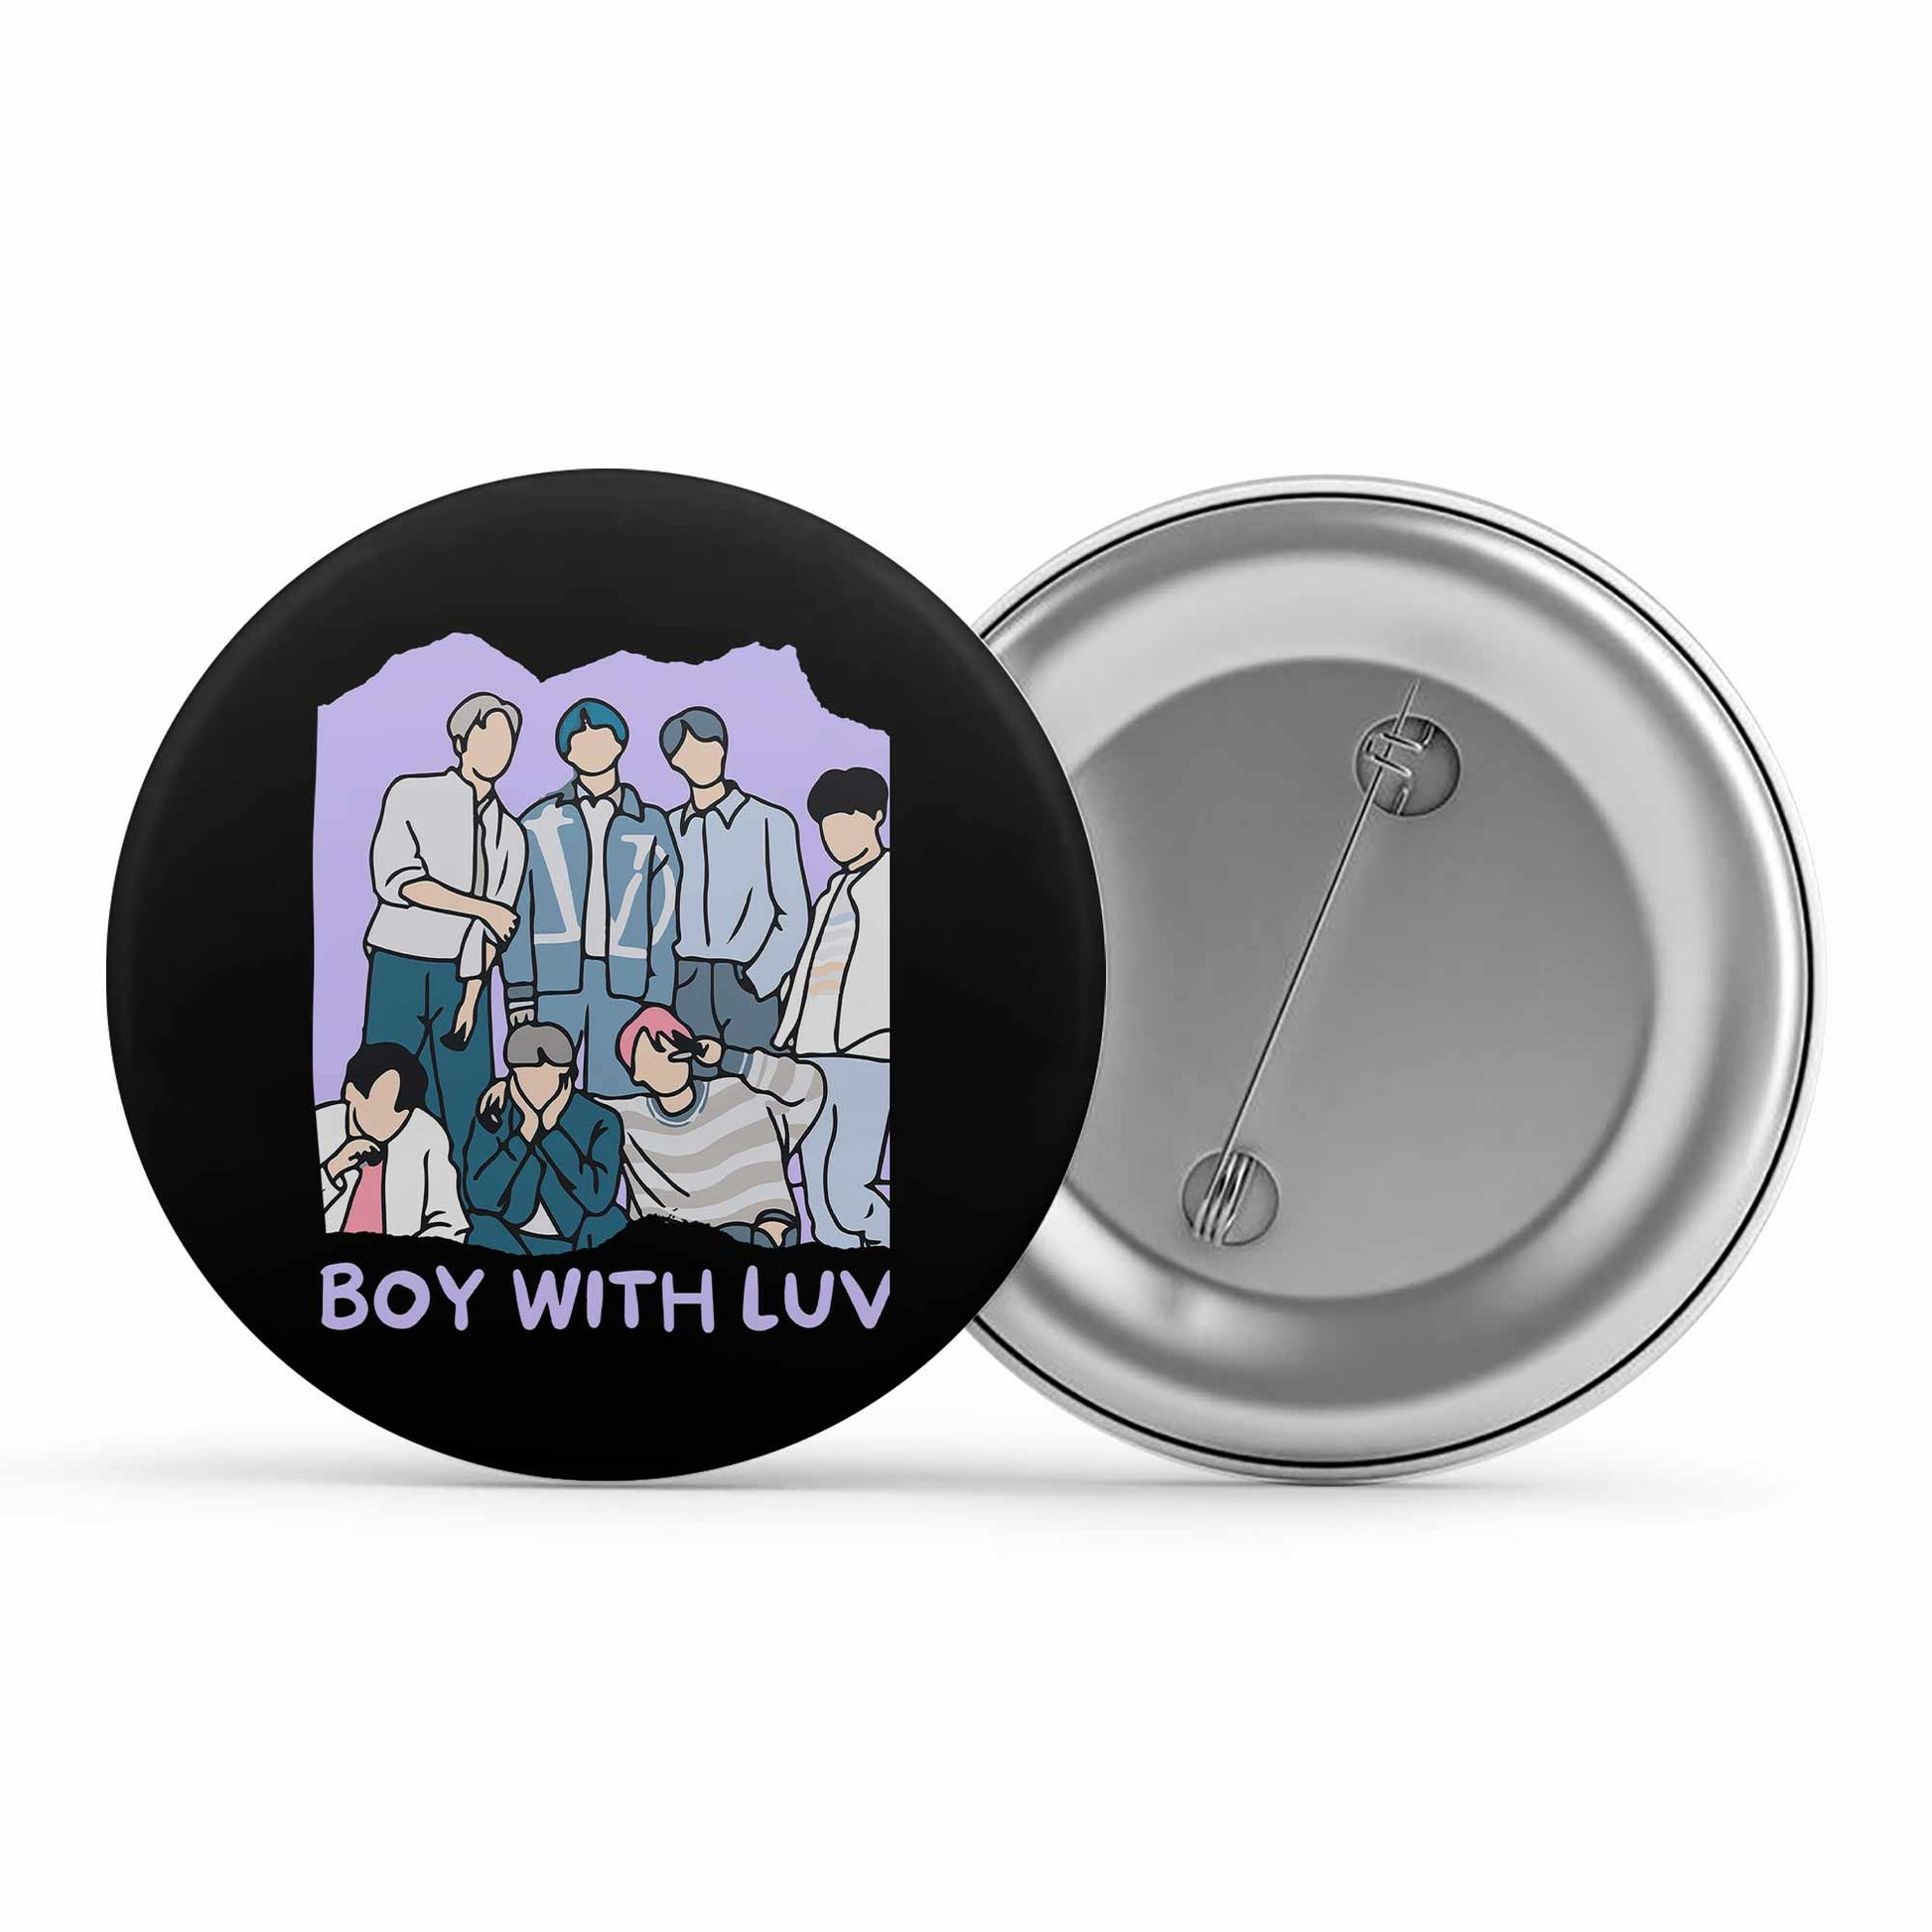 bts boy with luv badge pin button music band buy online india the banyan tee tbt men women girls boys unisex  